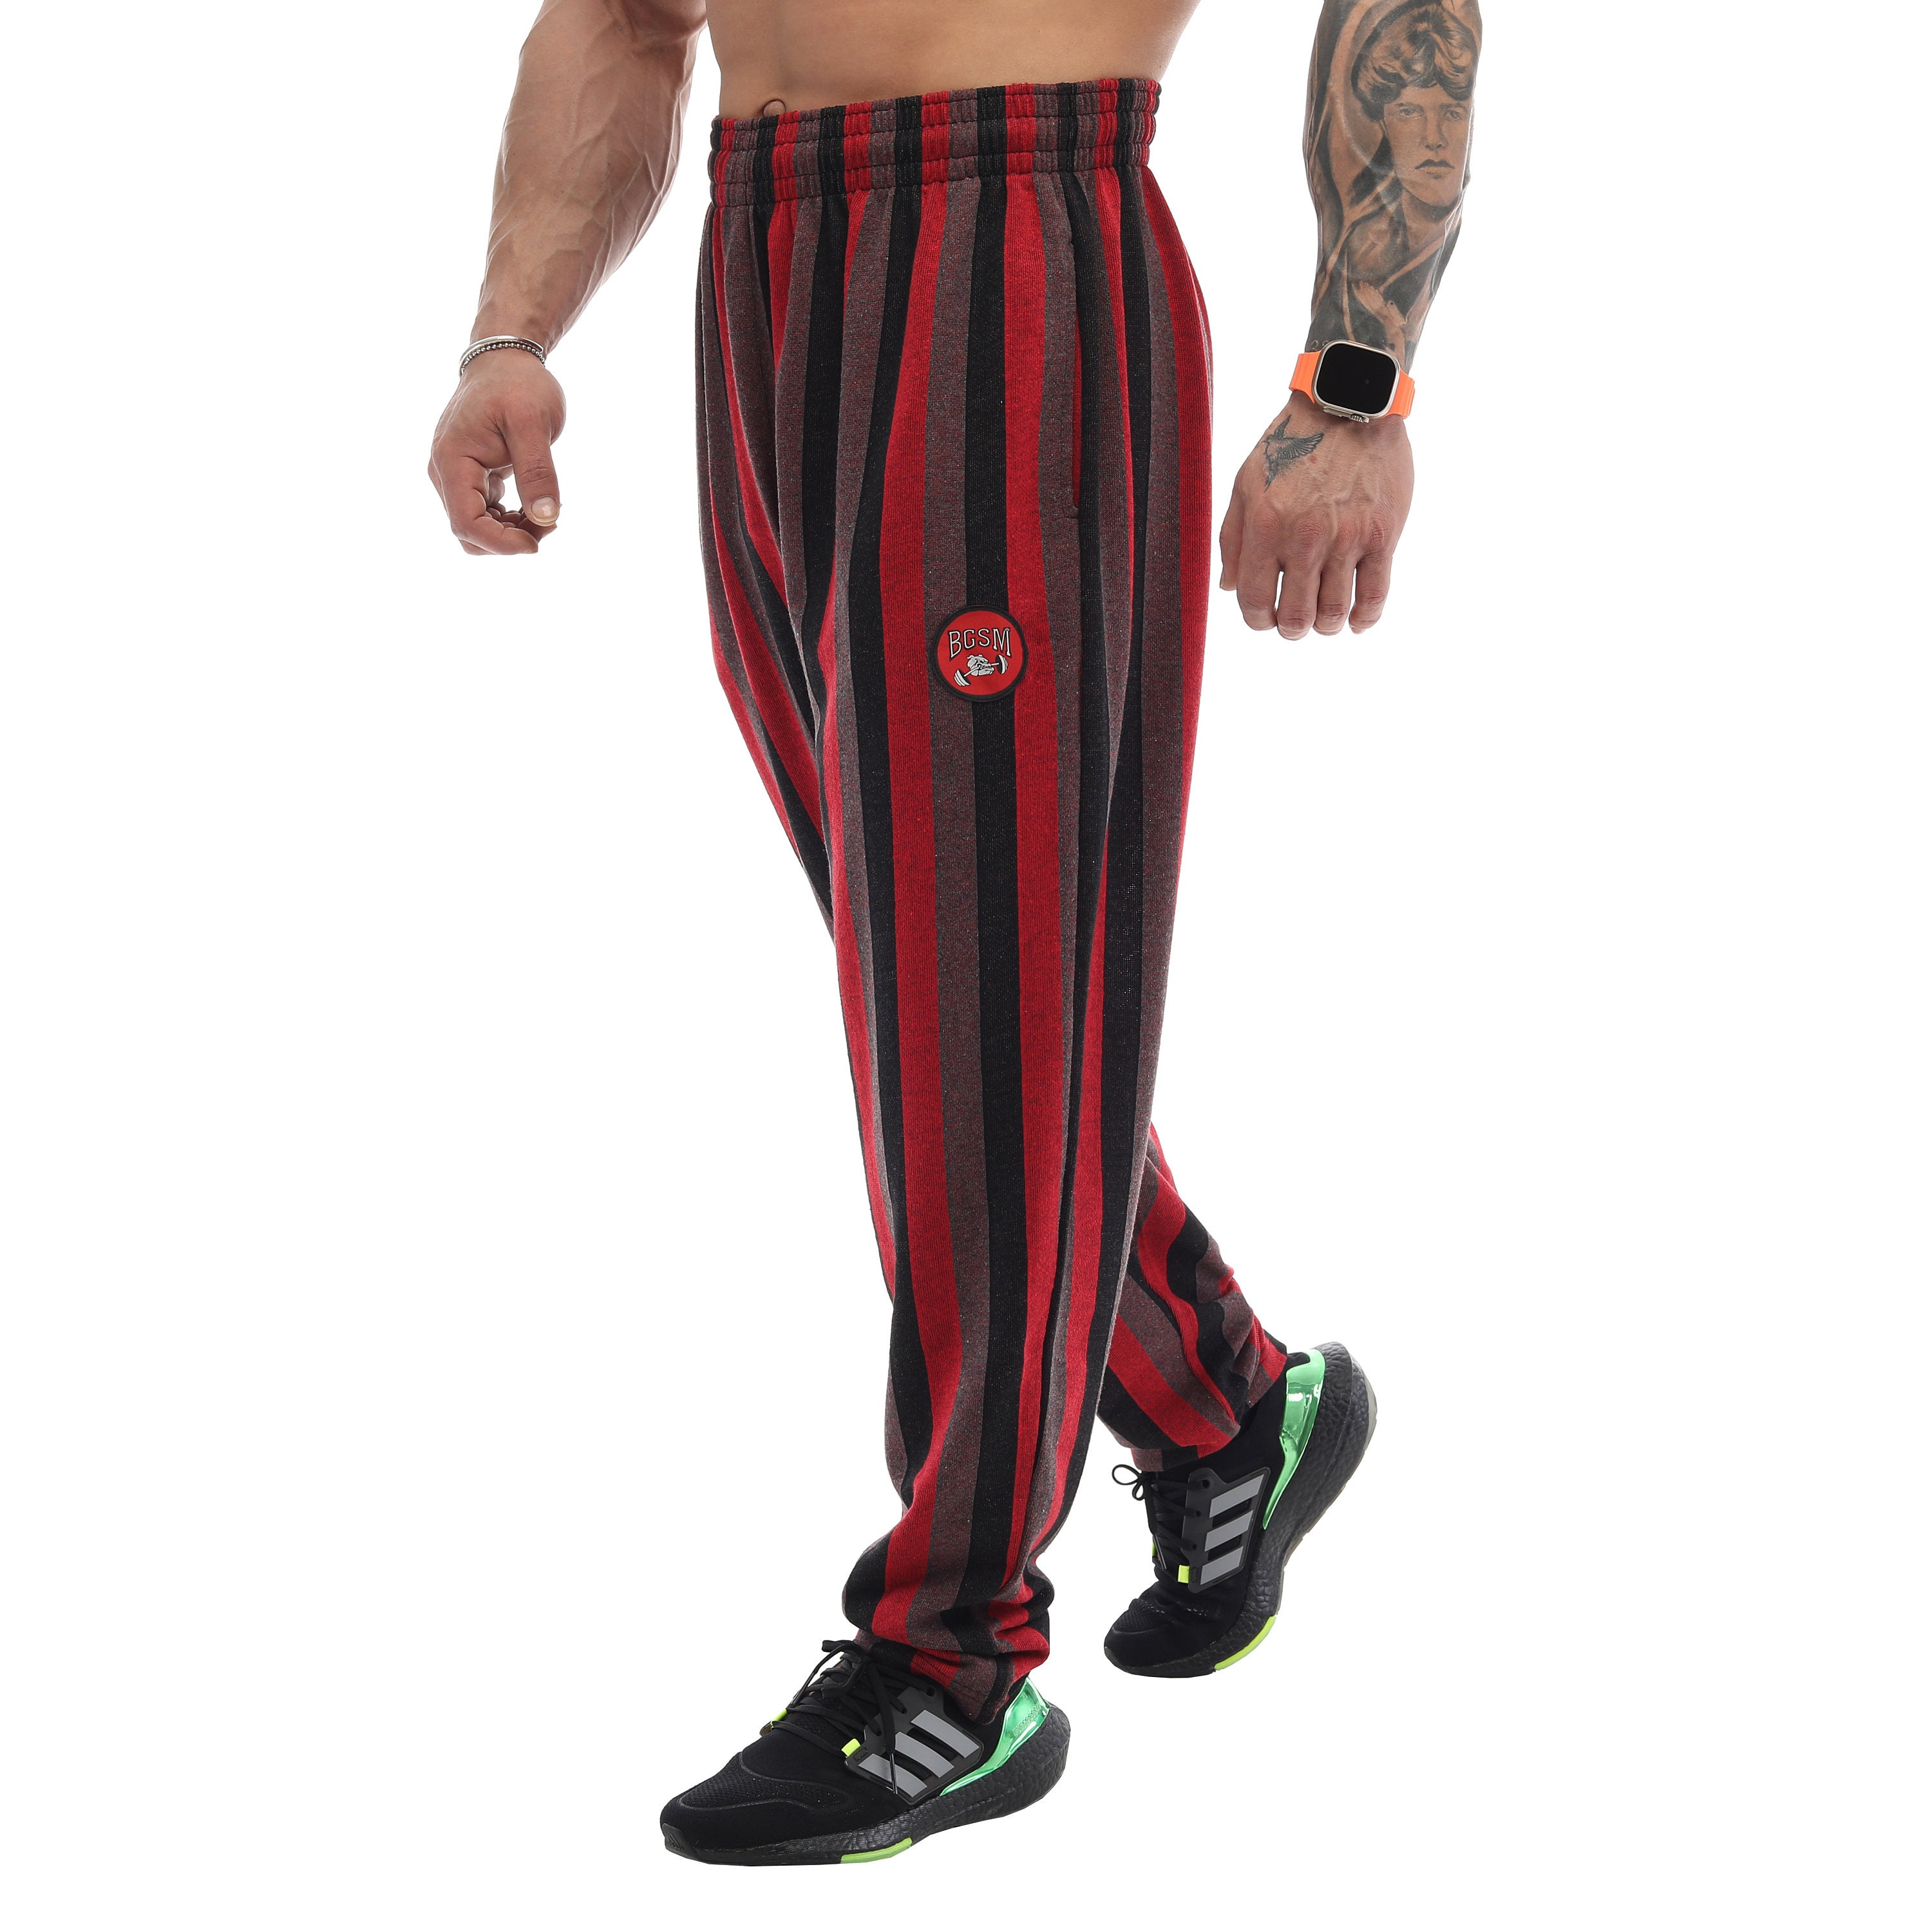 Men's Baggy Sweatpants With Pockets, Oldschool Gym Muscle Pants Gift for  Bodybuilders 